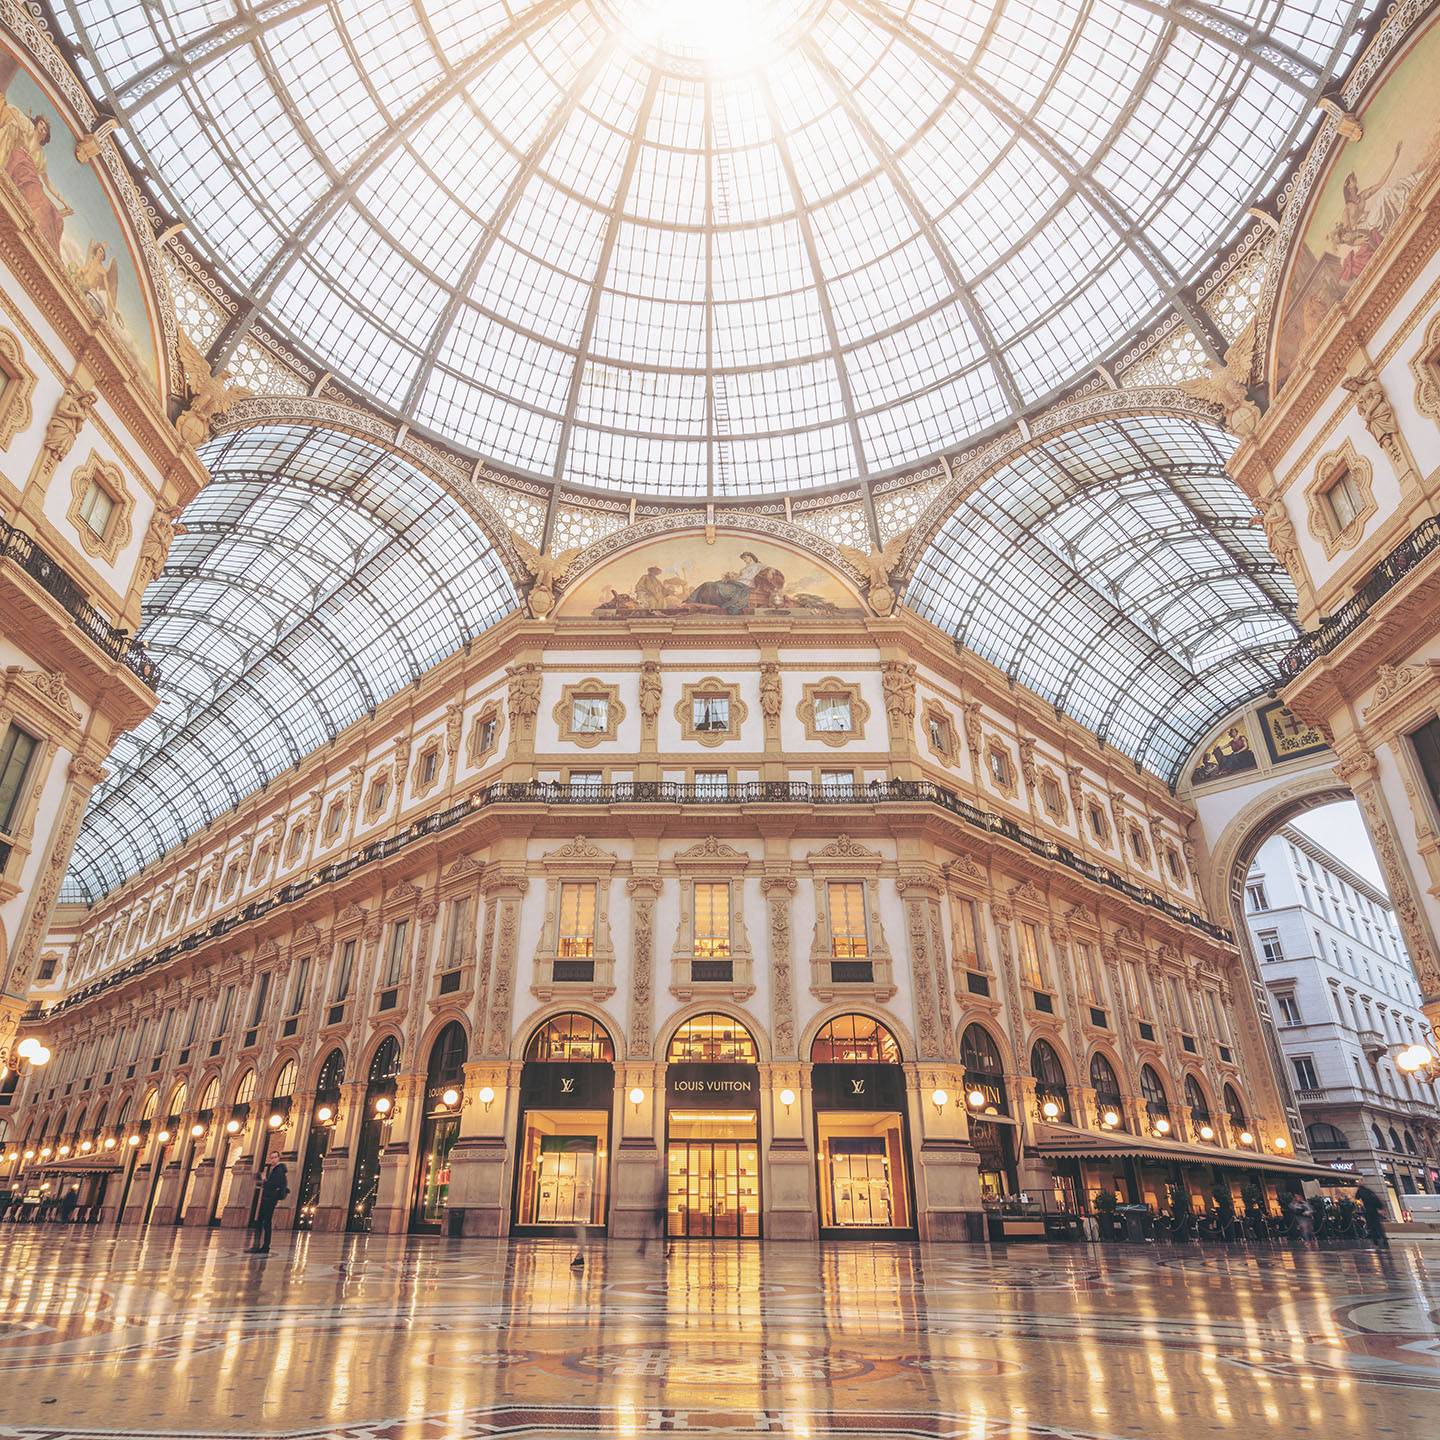 Milan, Italy - Sep 29, 2017: Galleria Vittorio Emanuele II in Milan, Italy is the oldest shopping mall of Milan. Galleria Vittorio Emanuele II was named after Victor Emmanuel II, first king of Italy.